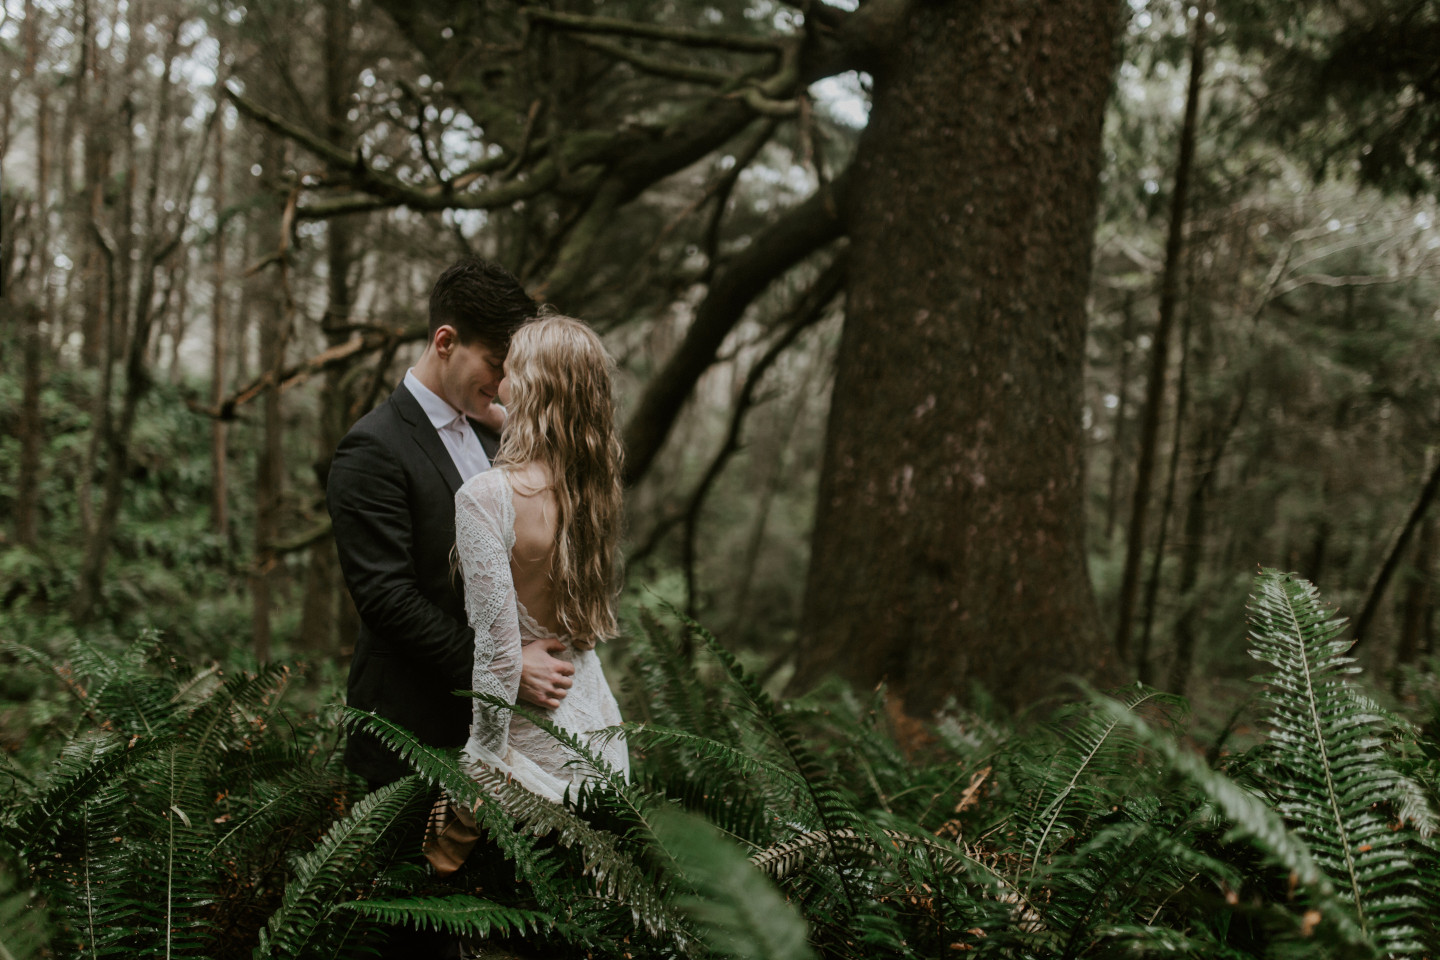 Hannah and Grant stand in the ferns in Cannon Beach, Oregon for their Oregon coast elopement. Wedding photography in Portland Oregon by Sienna Plus Josh.